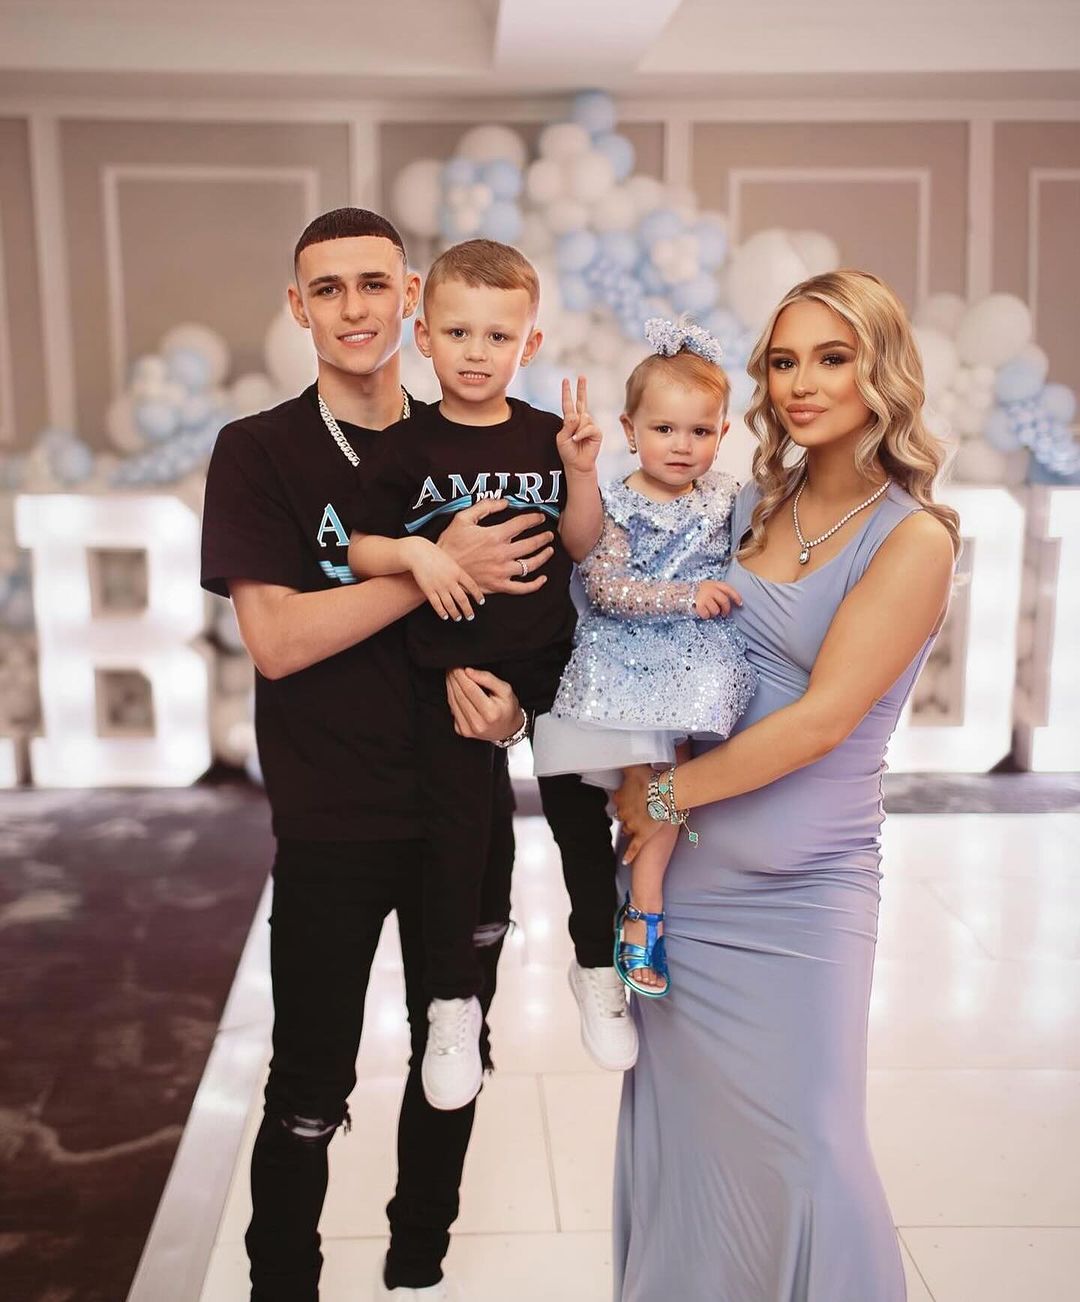 Phil Foden and partner Rebecca Cooke are said to be expecting their third child